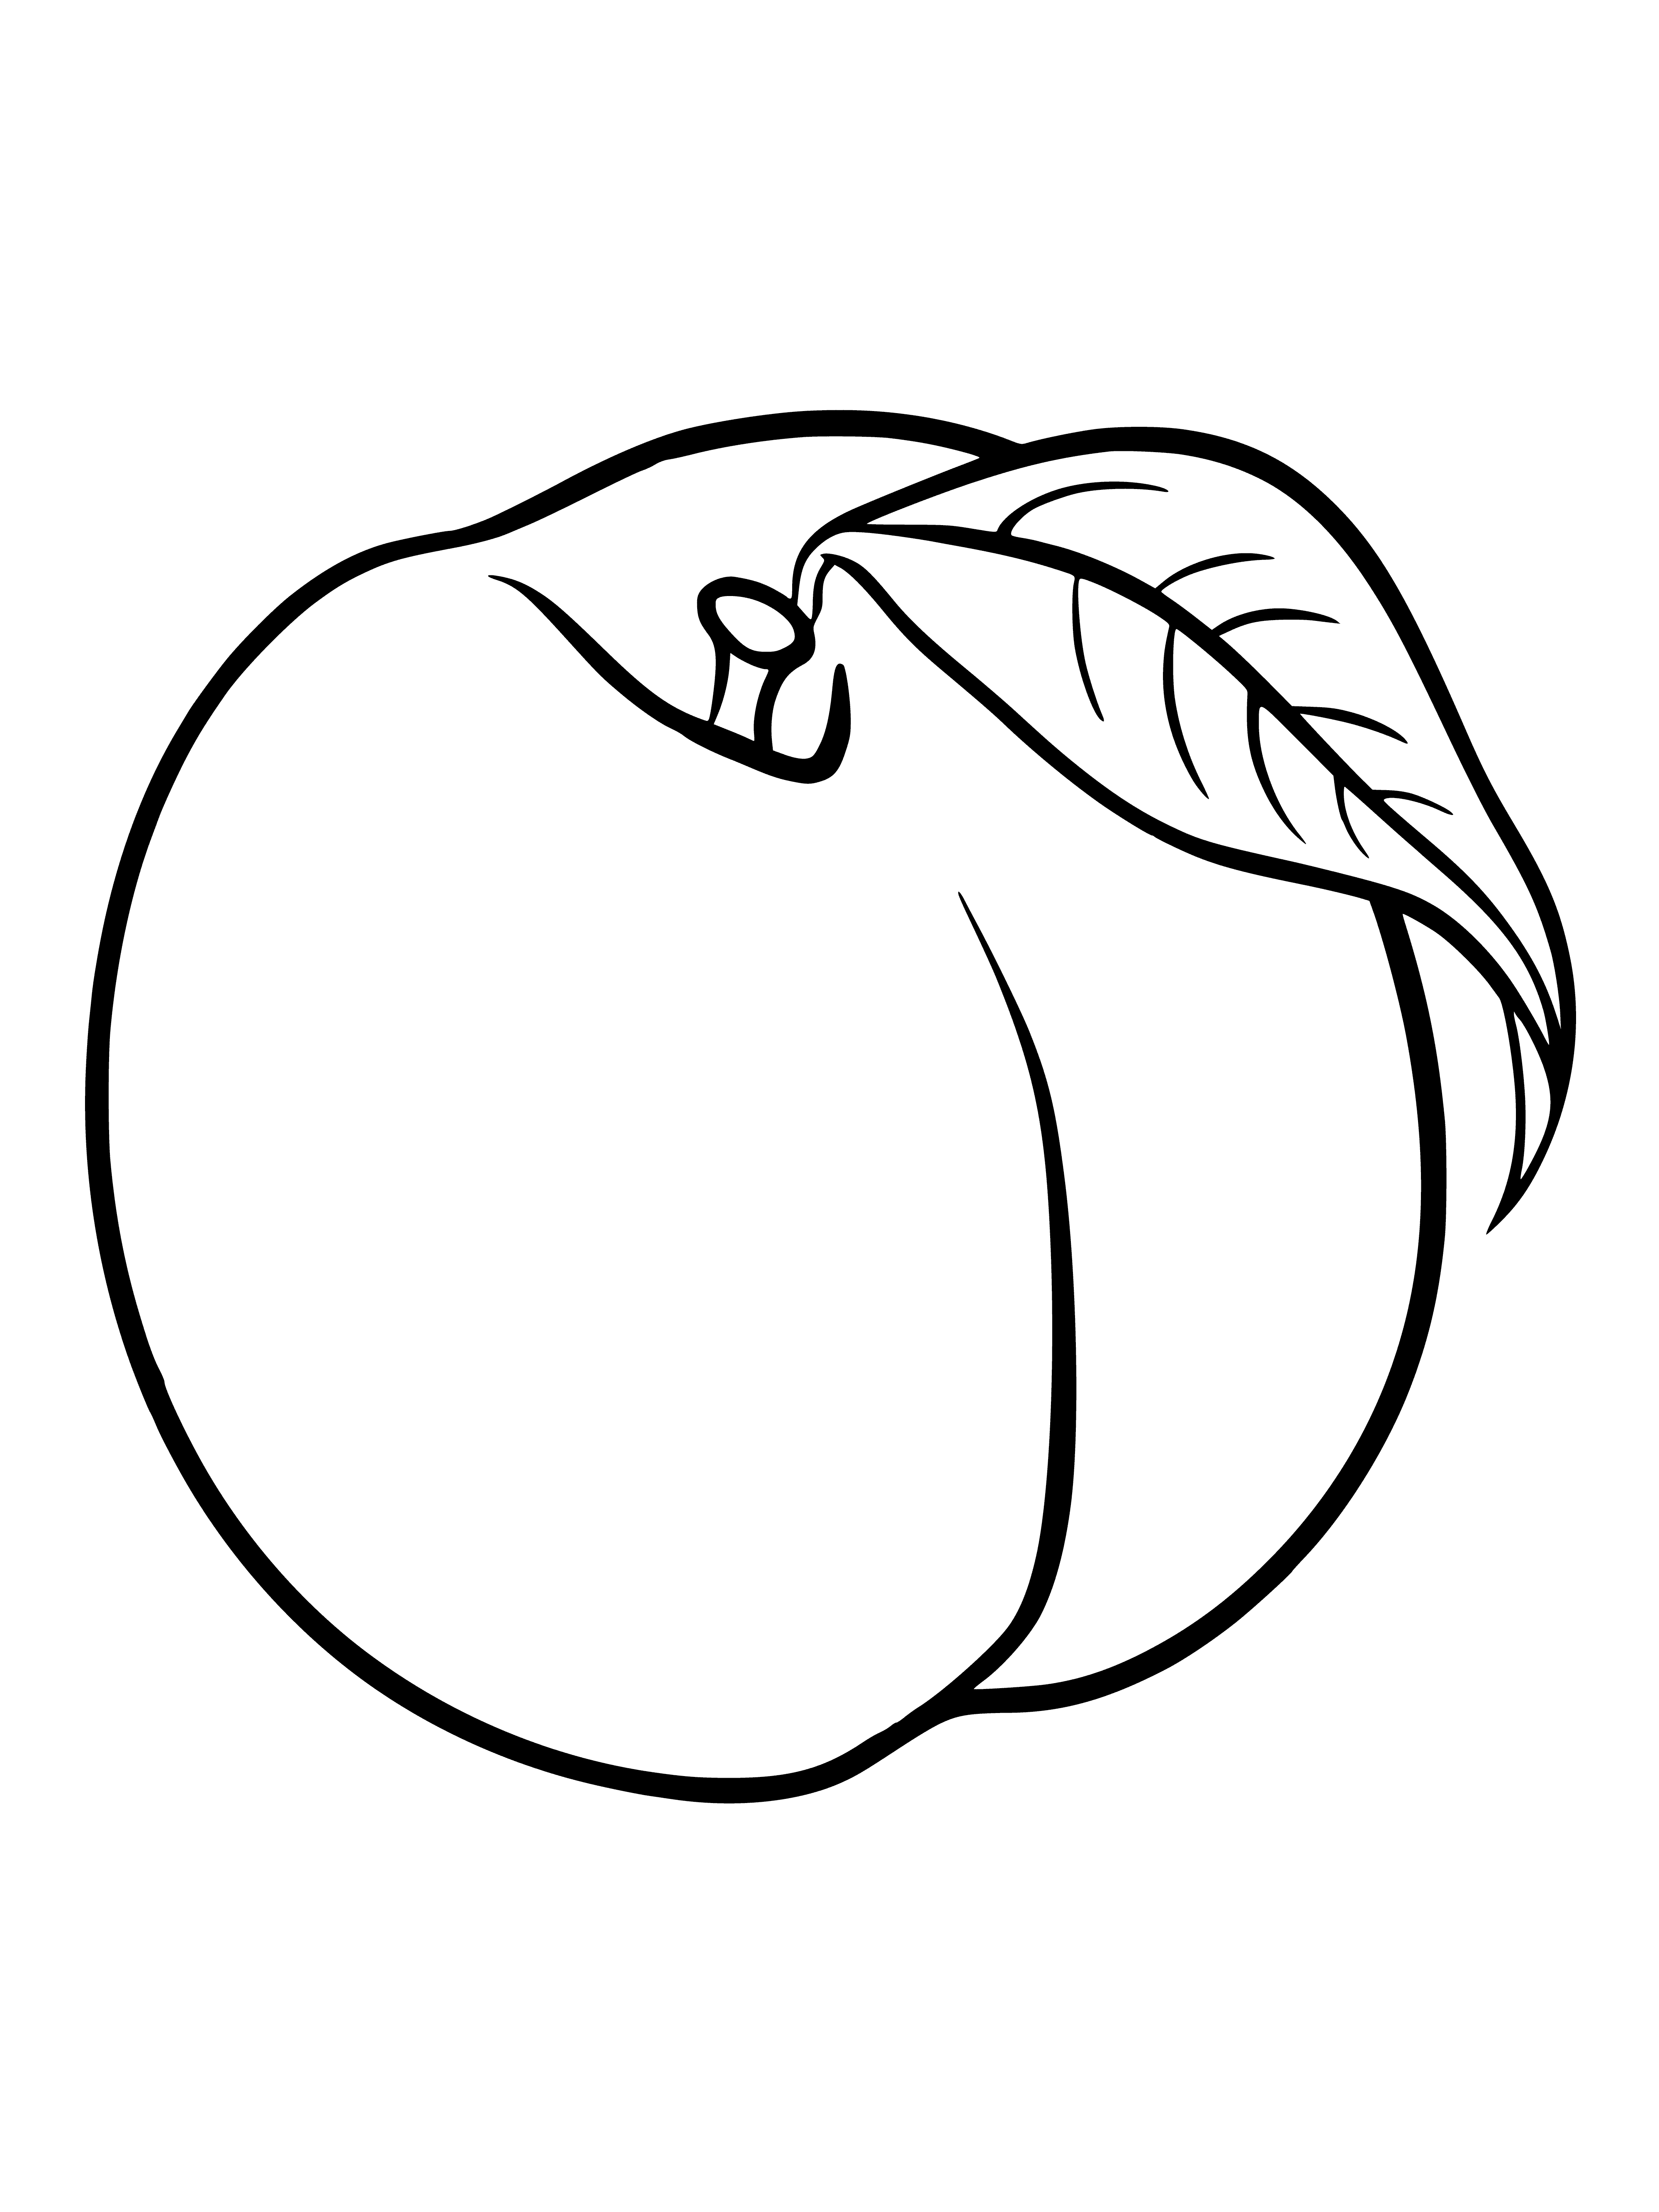 Peach coloring page